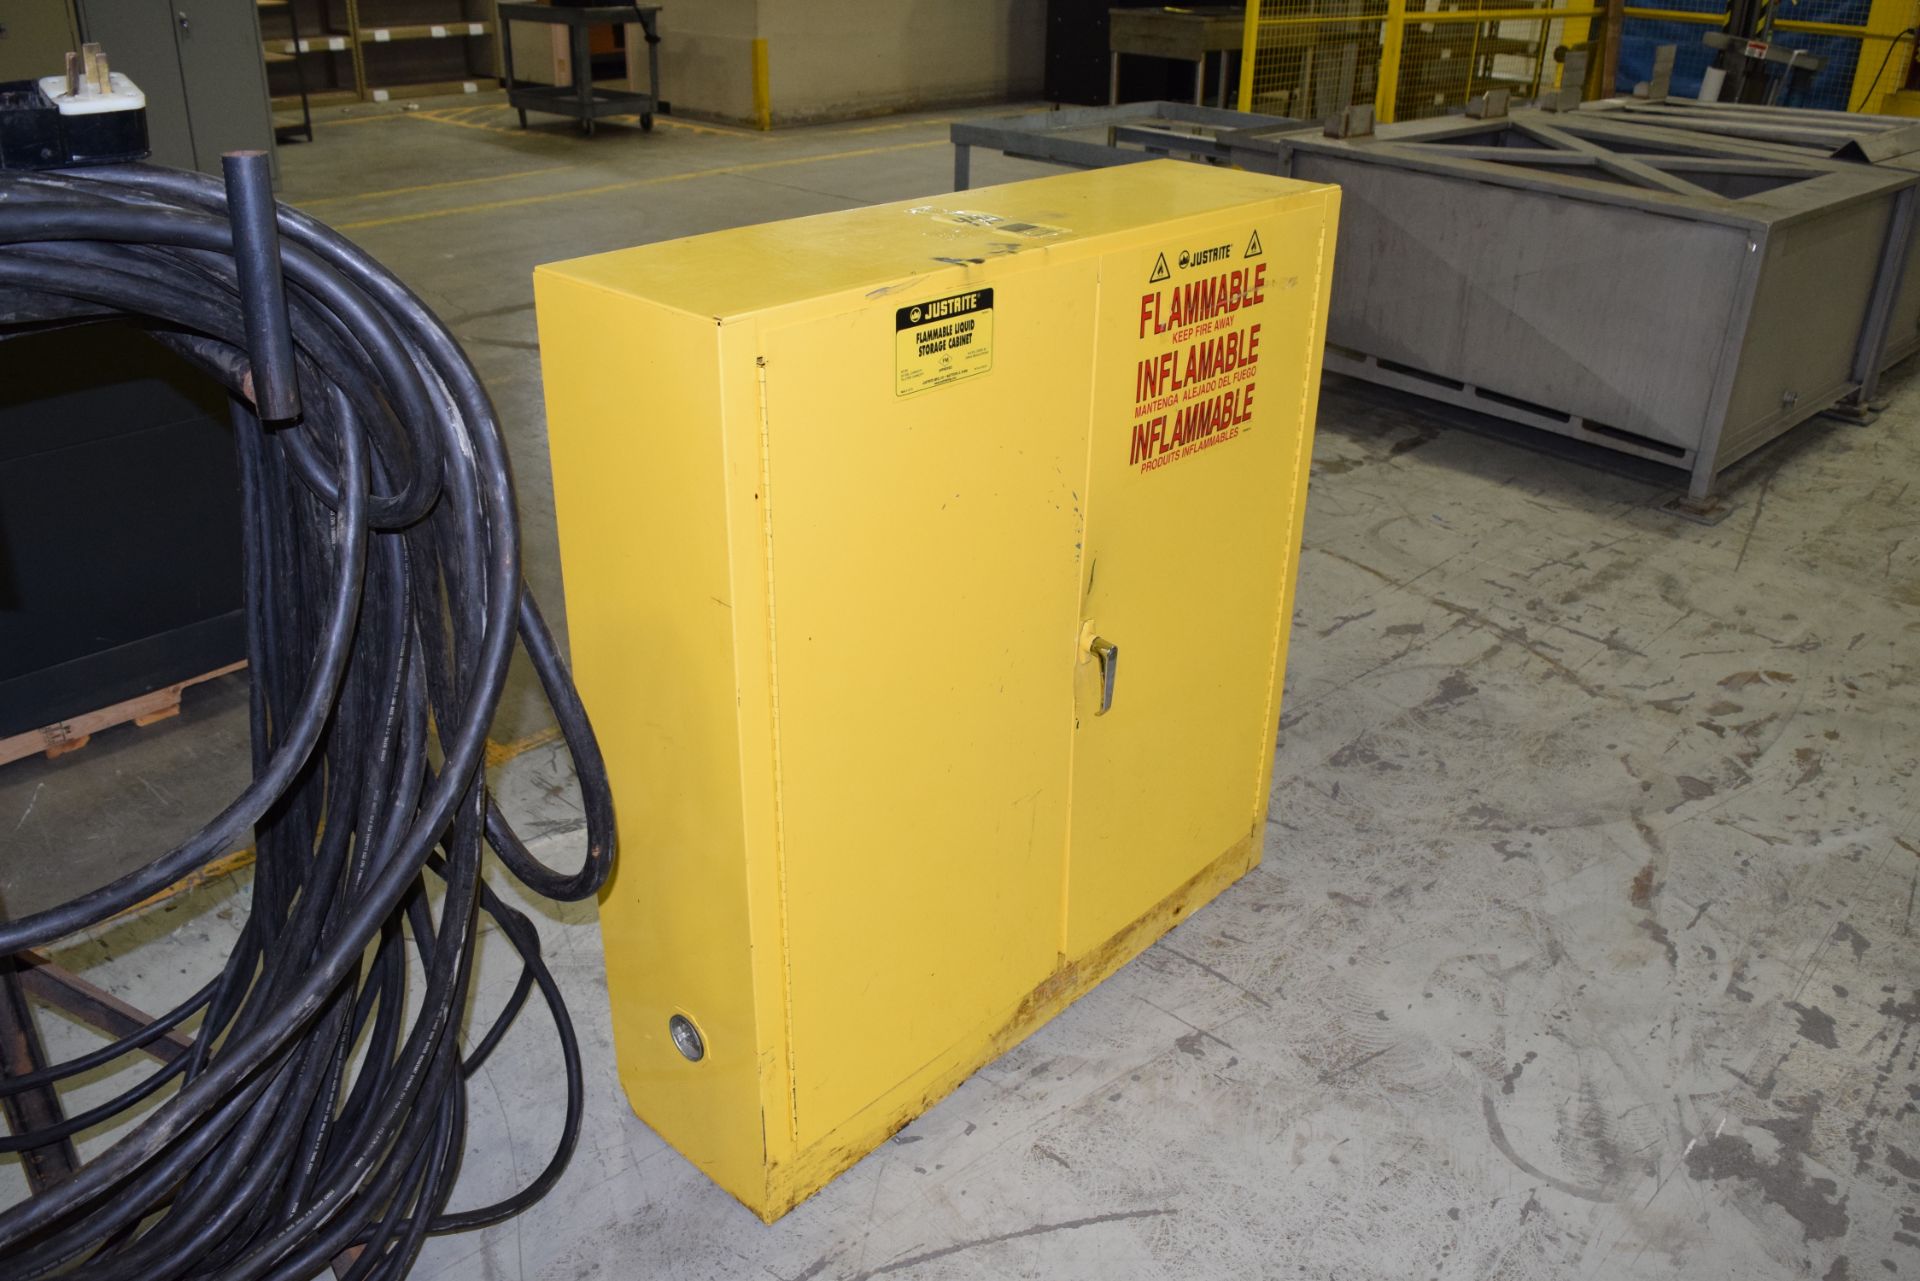 Just Rite 20 Gallon/76 Liter Flammable Storage Cabinet Rigging Charge:10 Skidding Charge:25